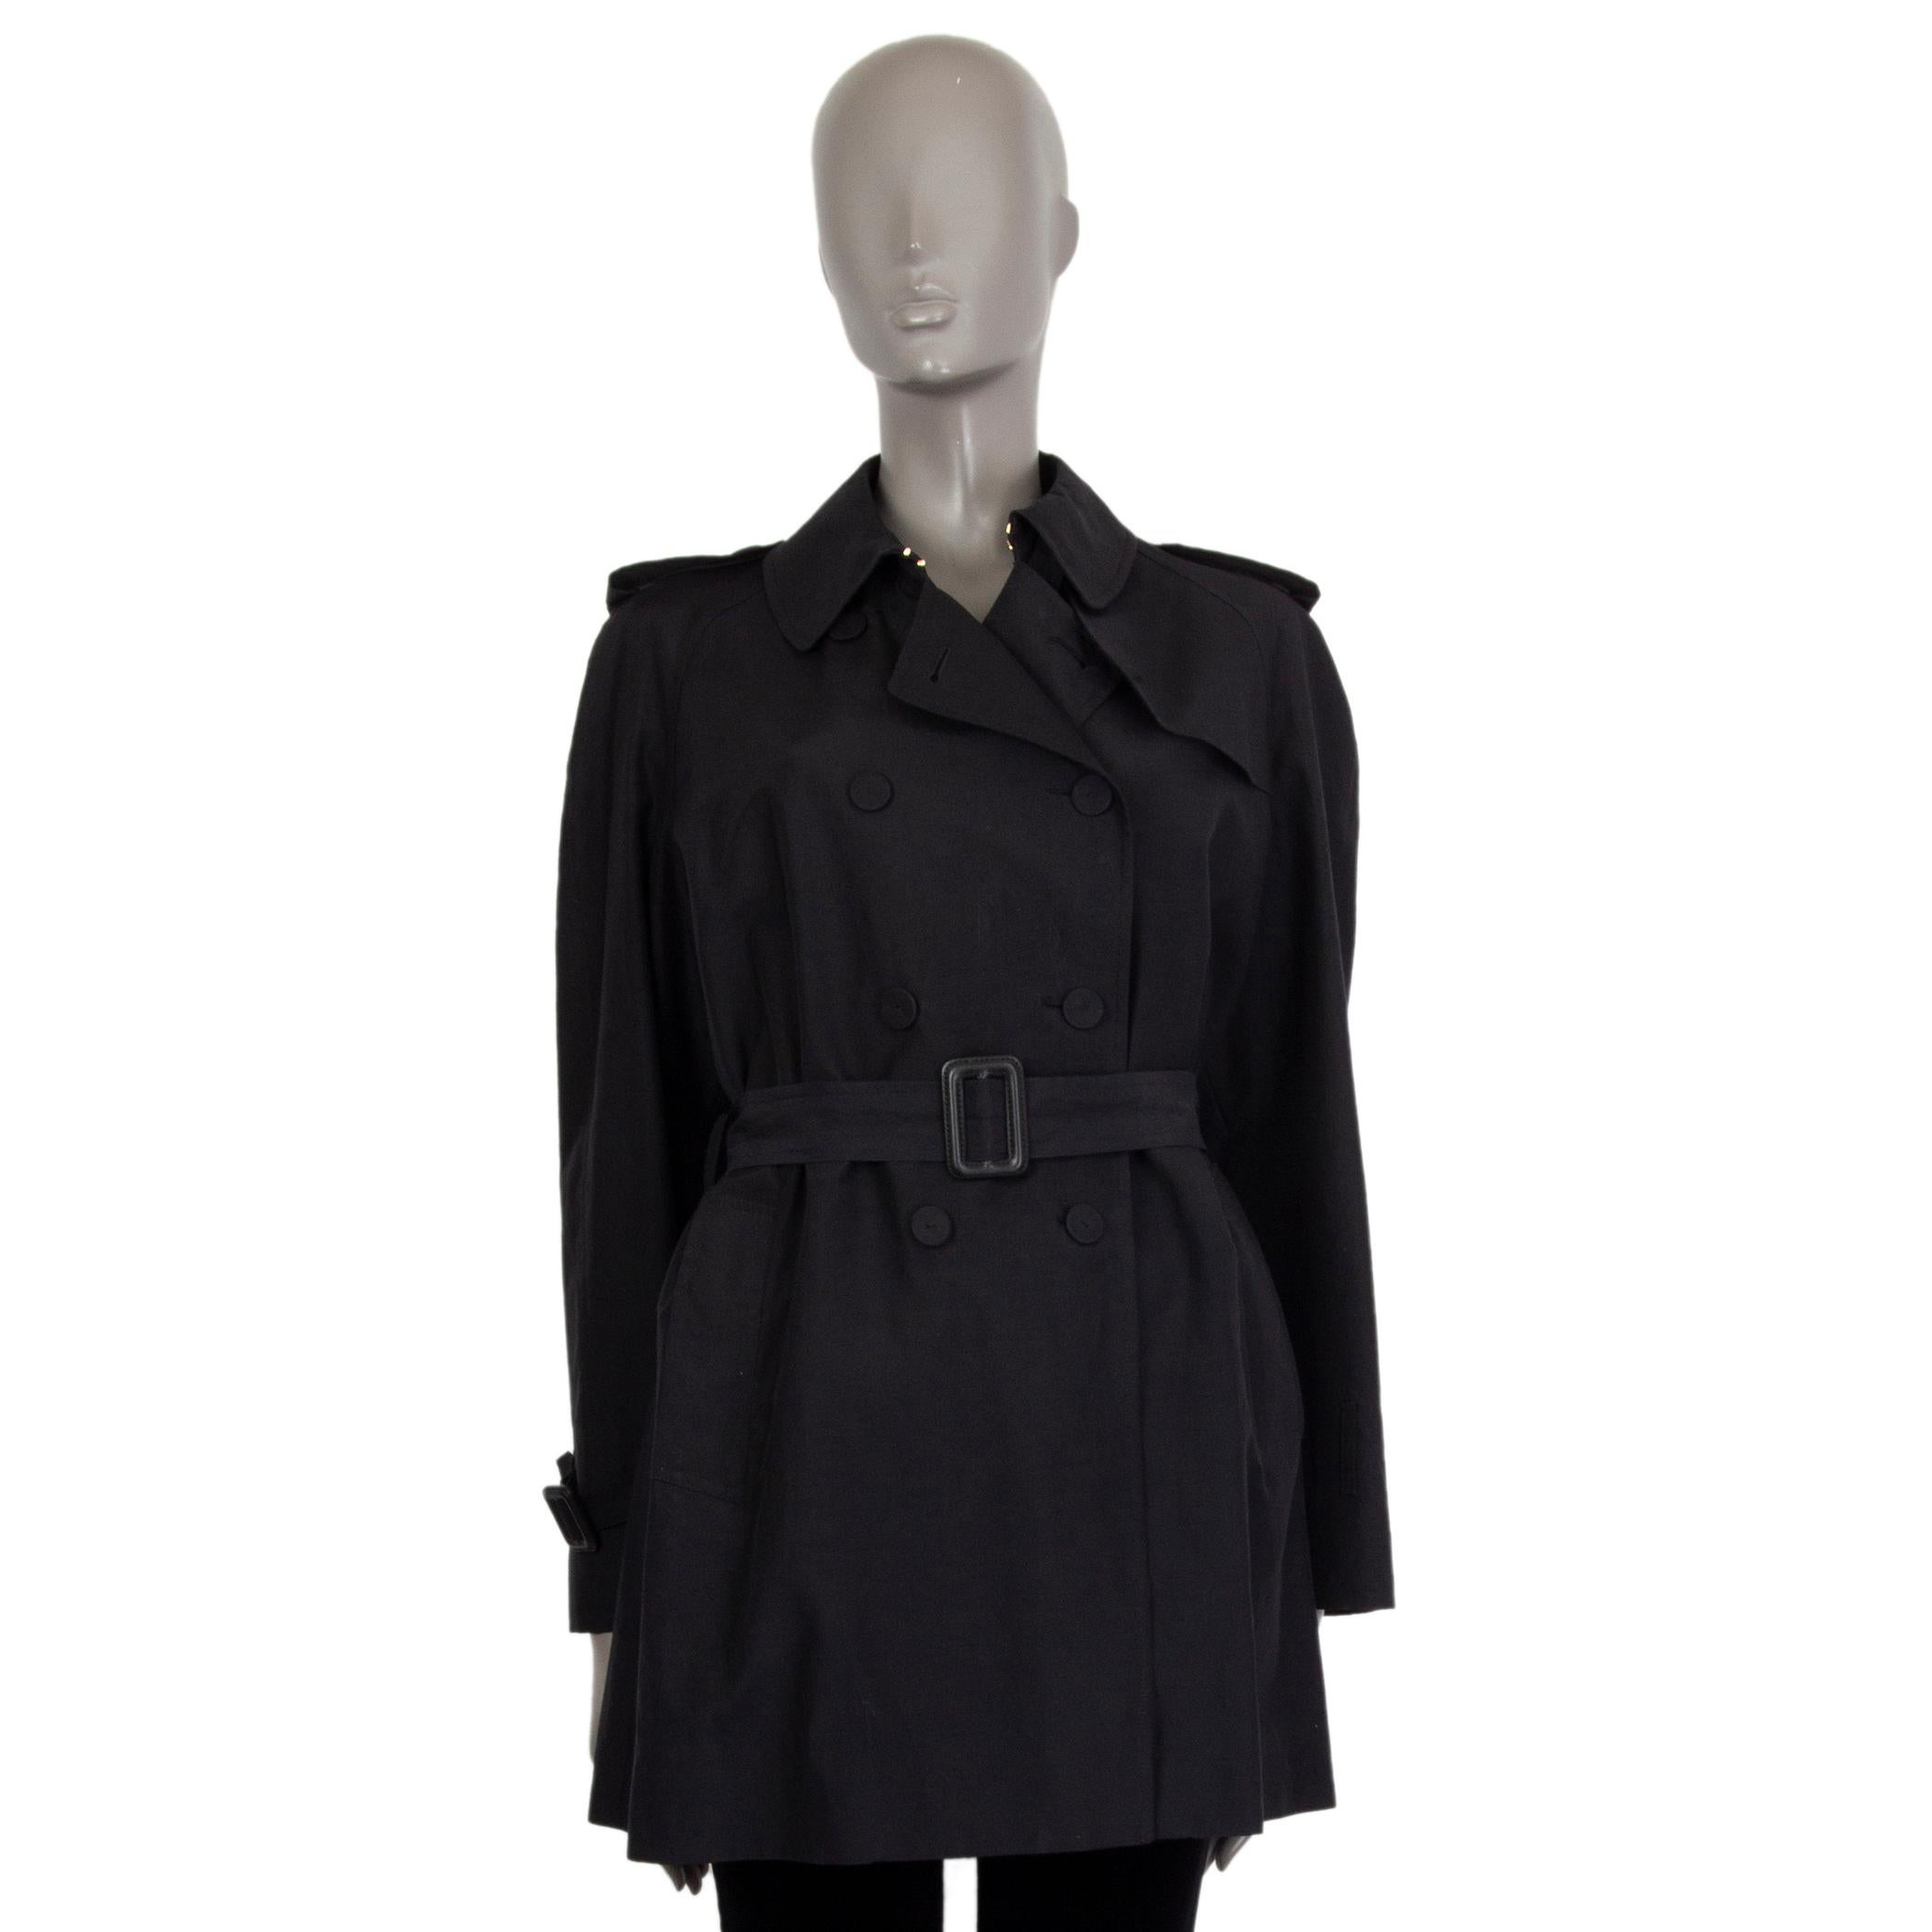 Black Alexander McQueen black cotton Double Breasted Trench Coat Jacket 42